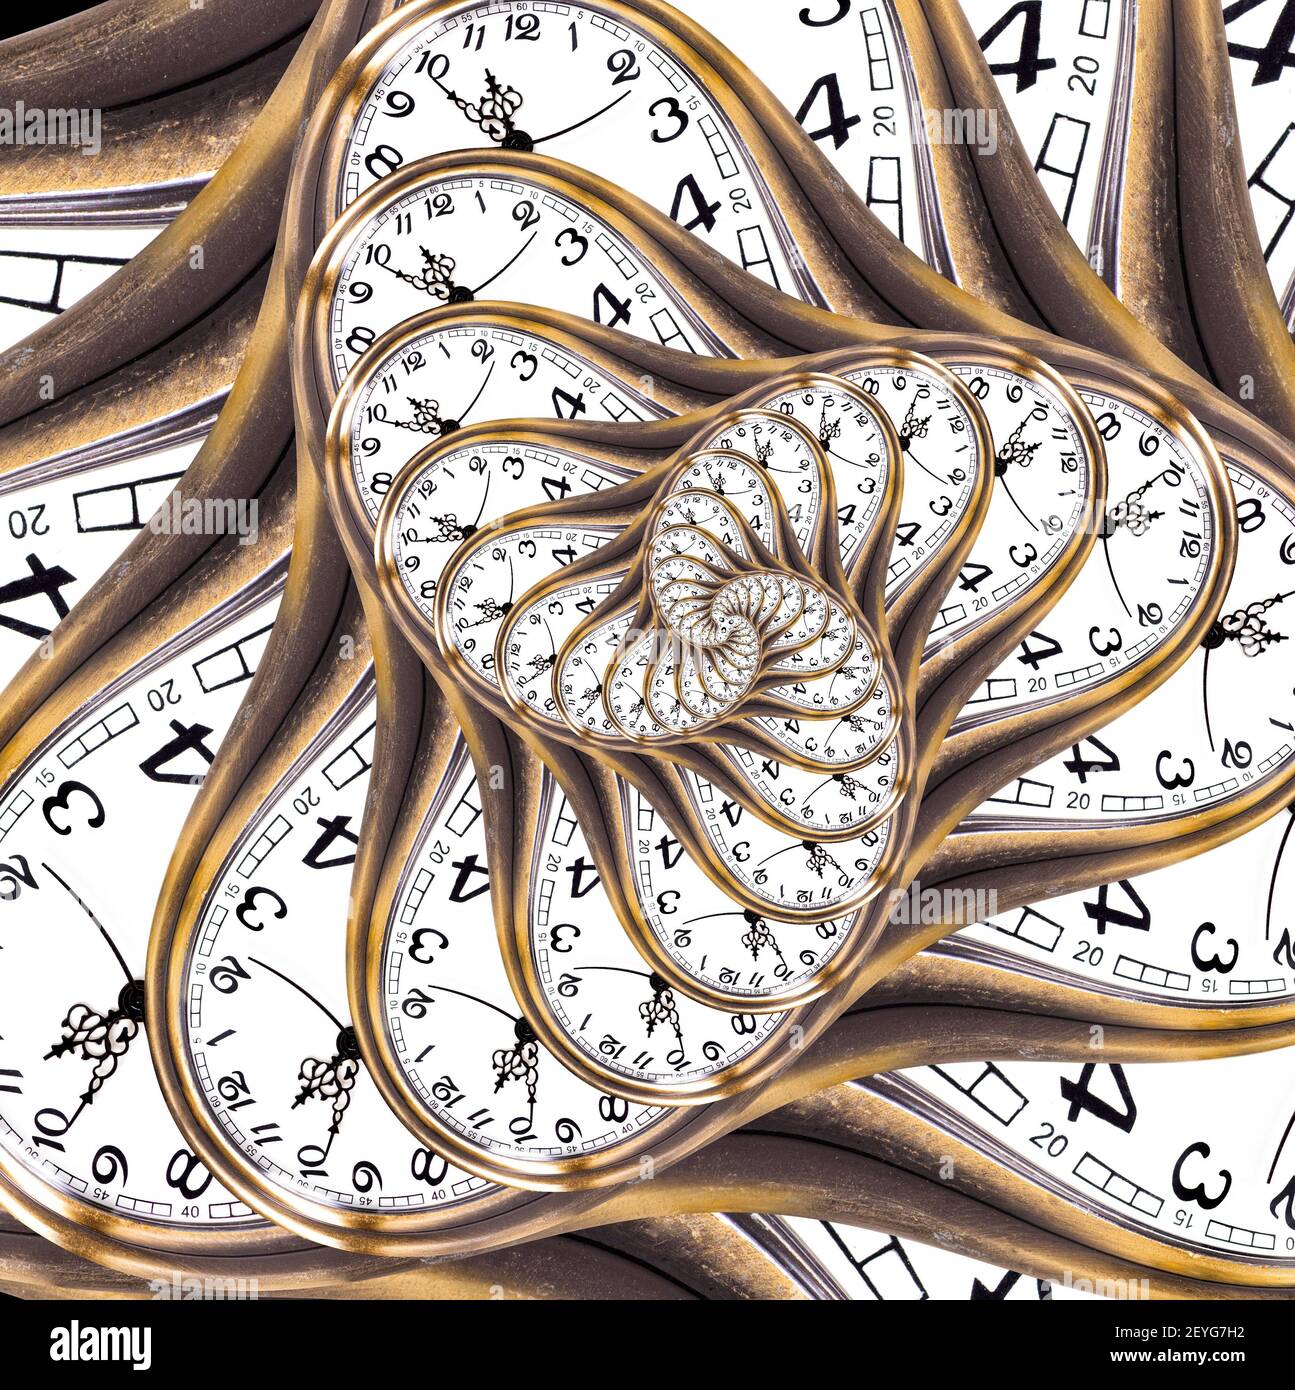 Abstract droste effect background. Time spiral concept. Swirled bronze watch face. Stock Photo